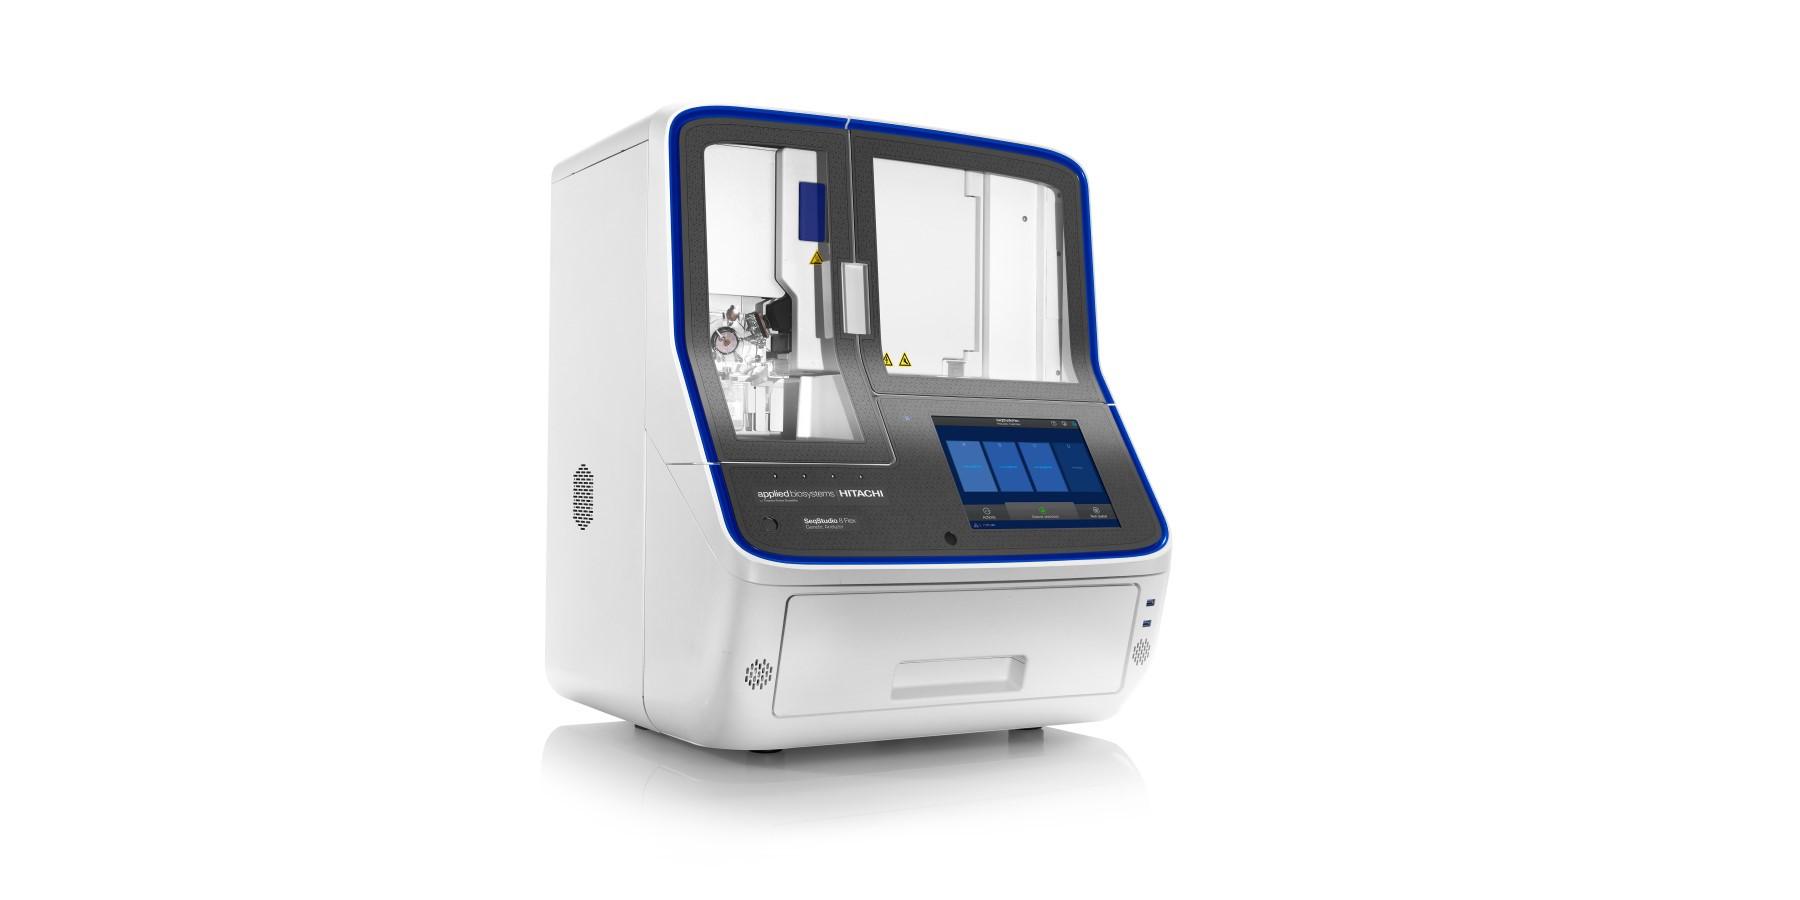 New Genetic Analyzer for Sanger Sequencing and Fragment Analysis